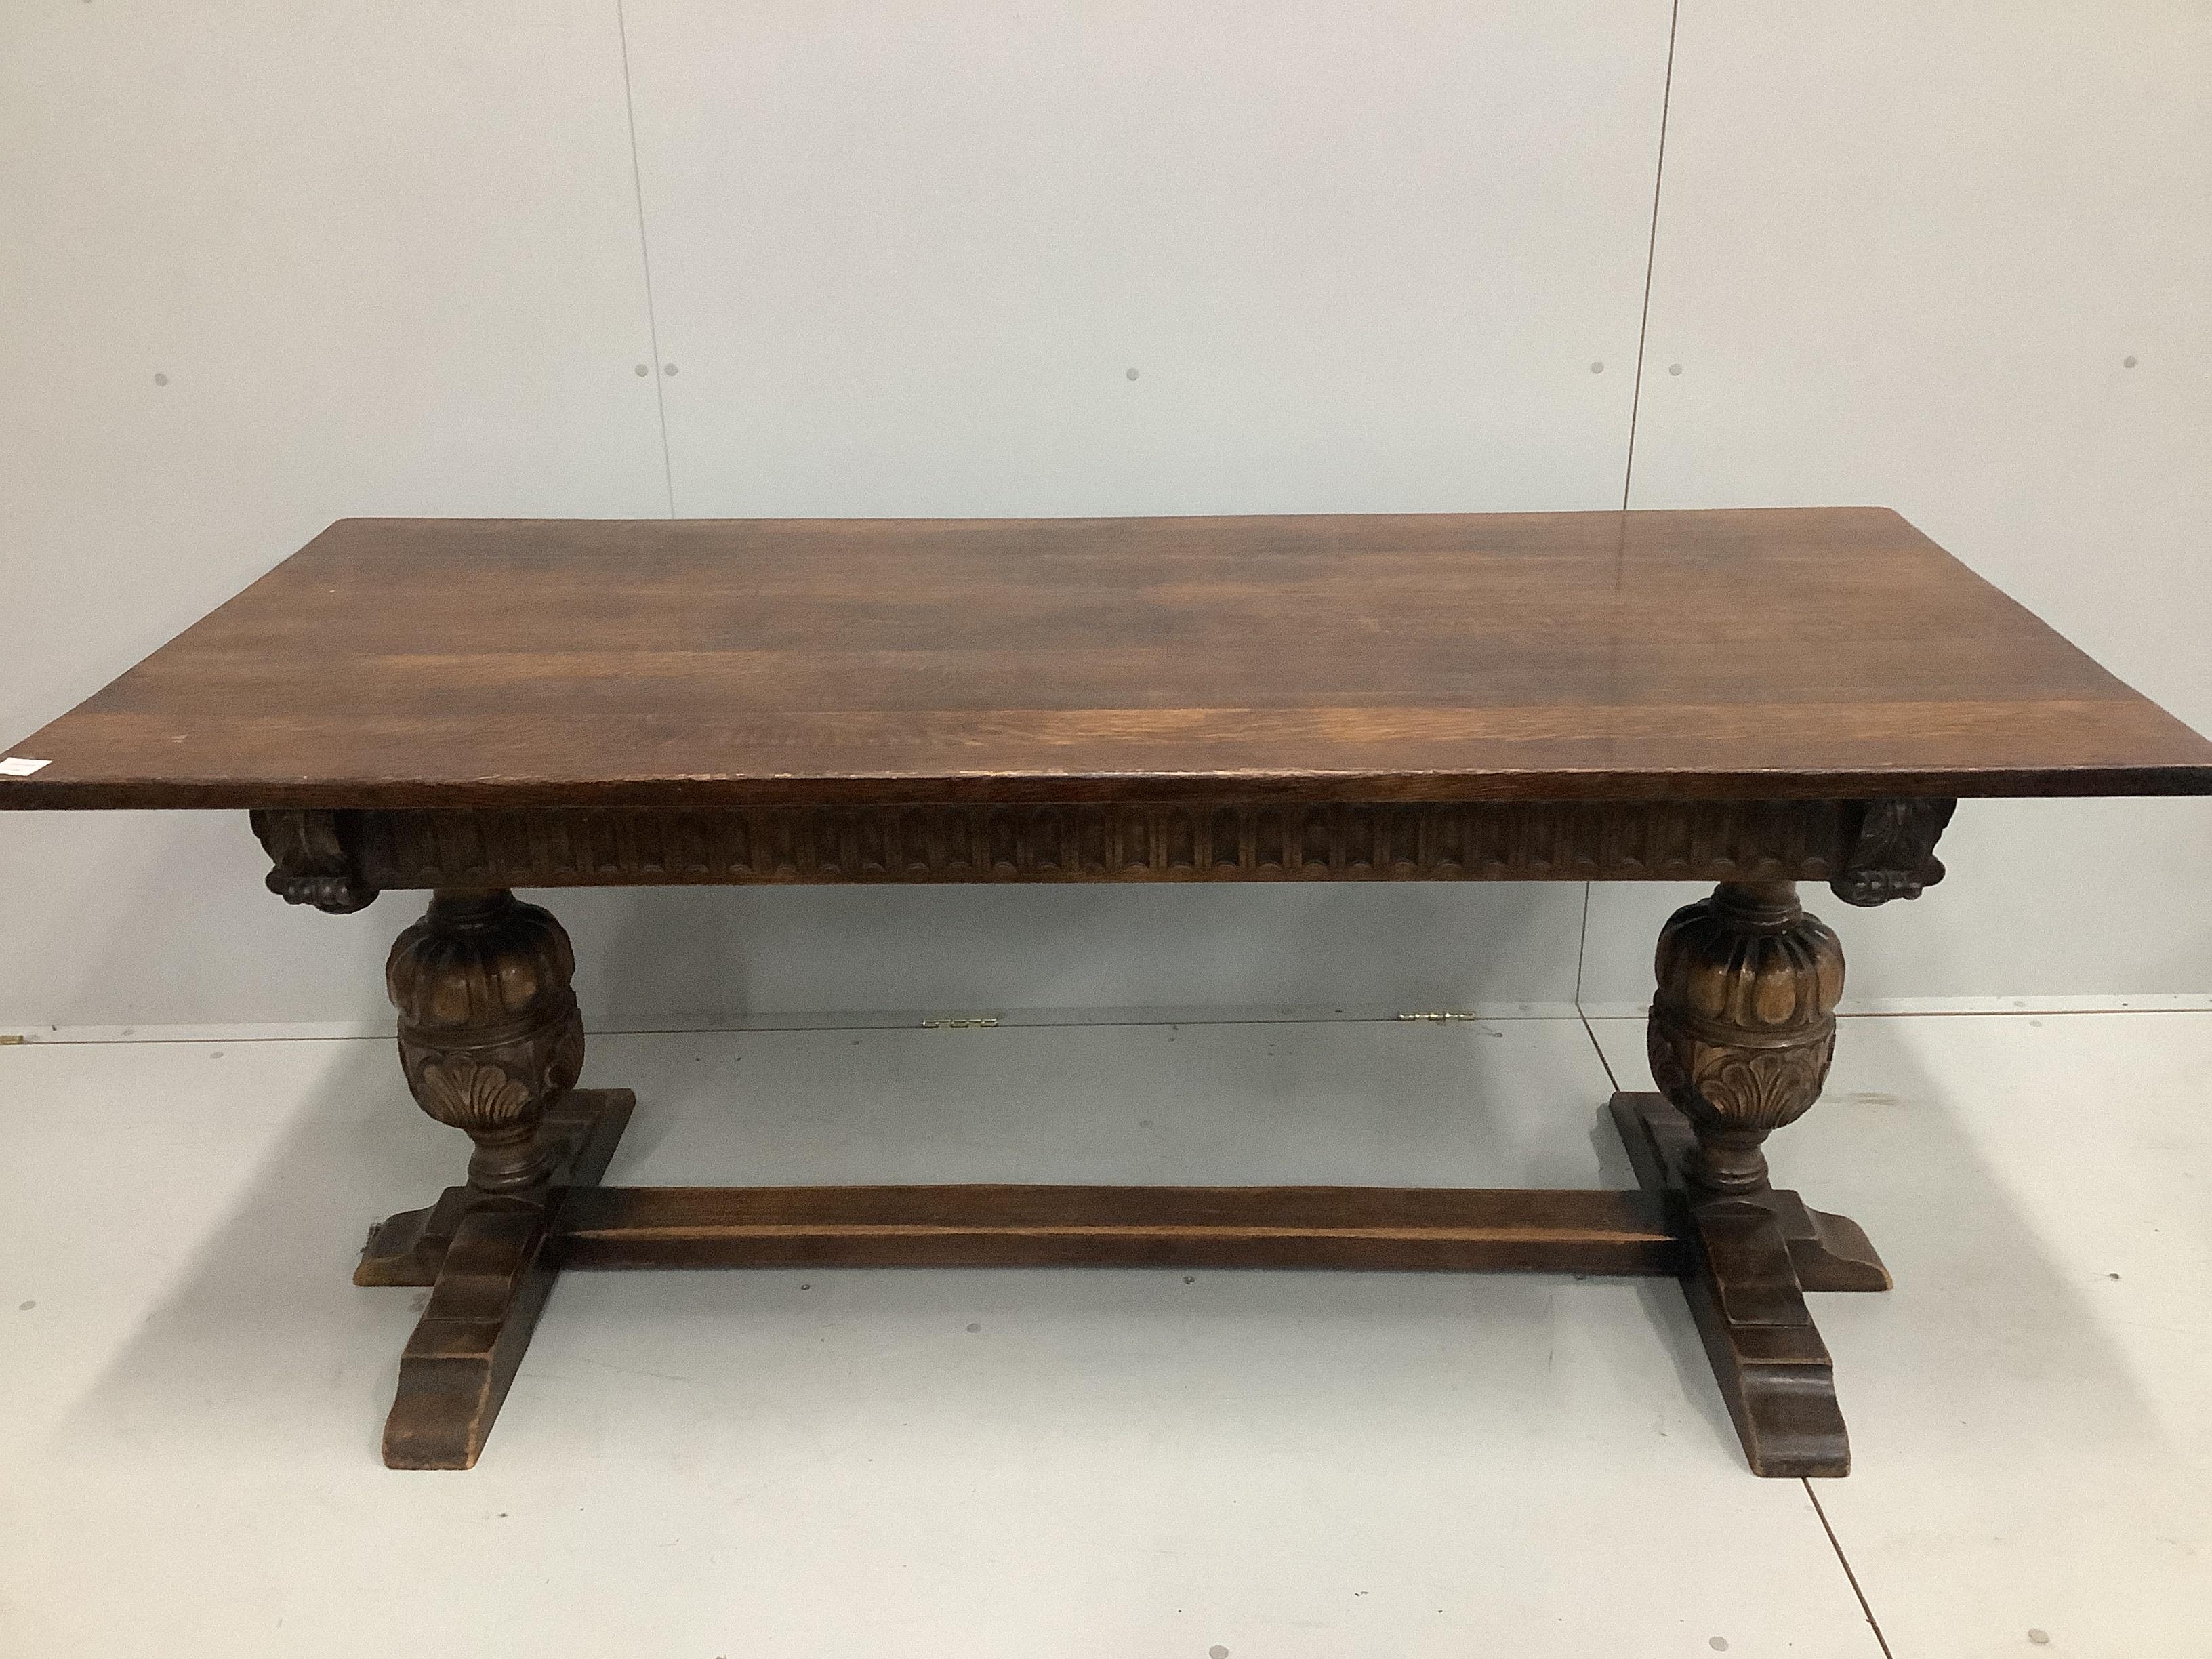 An 18th century style rectangular oak refectory dining table, width 183cm, depth 83cm, height 77cm and eight studded leather chairs                                                                                         